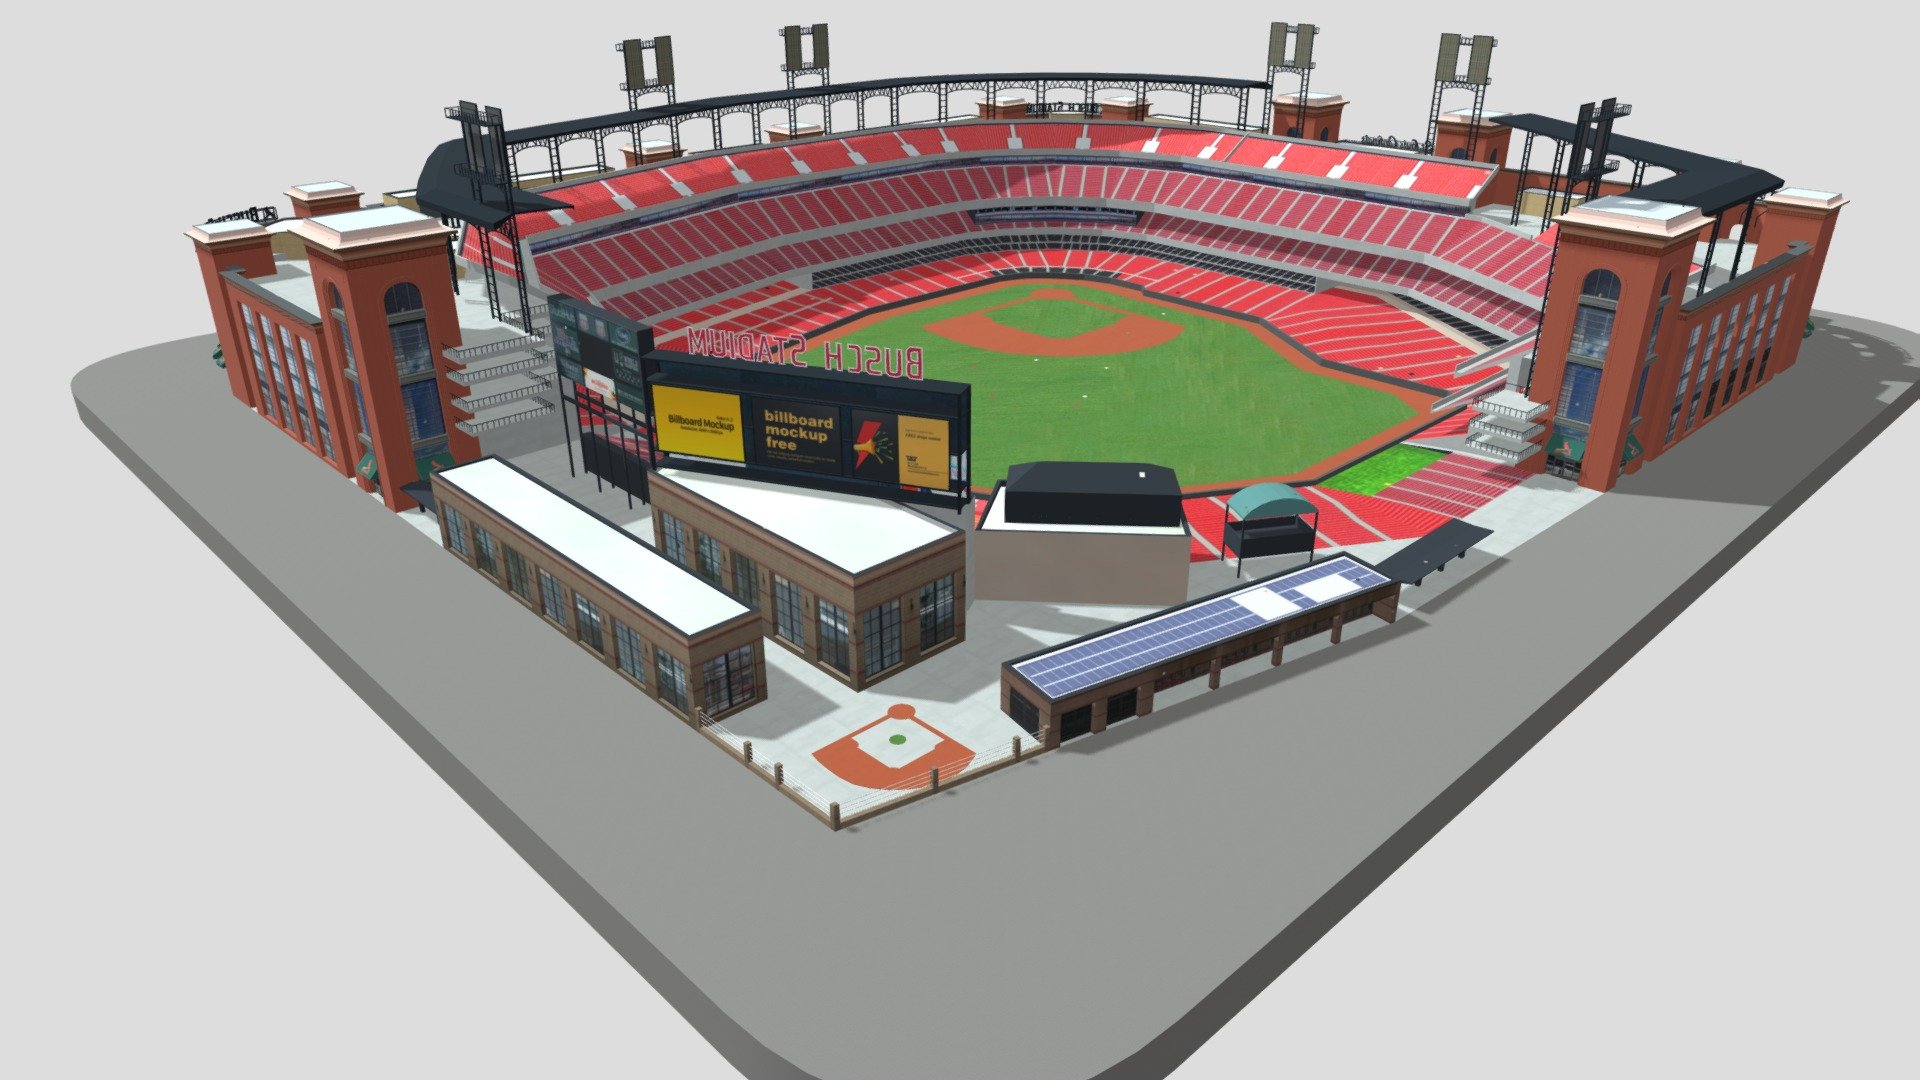 Busch Baseball Stadium
Originally created with 3ds Max 2015 and rendered in V-Ray 3.0

Total Poly Counts:
Poly Count = 62110
Vertex Count = 74963

Please Visit:
https://nuralam3d.blogspot.com/2022/01/busch-baseball-stadium.html - Busch Baseball Stadium - 3D model by nuralam018 3d model